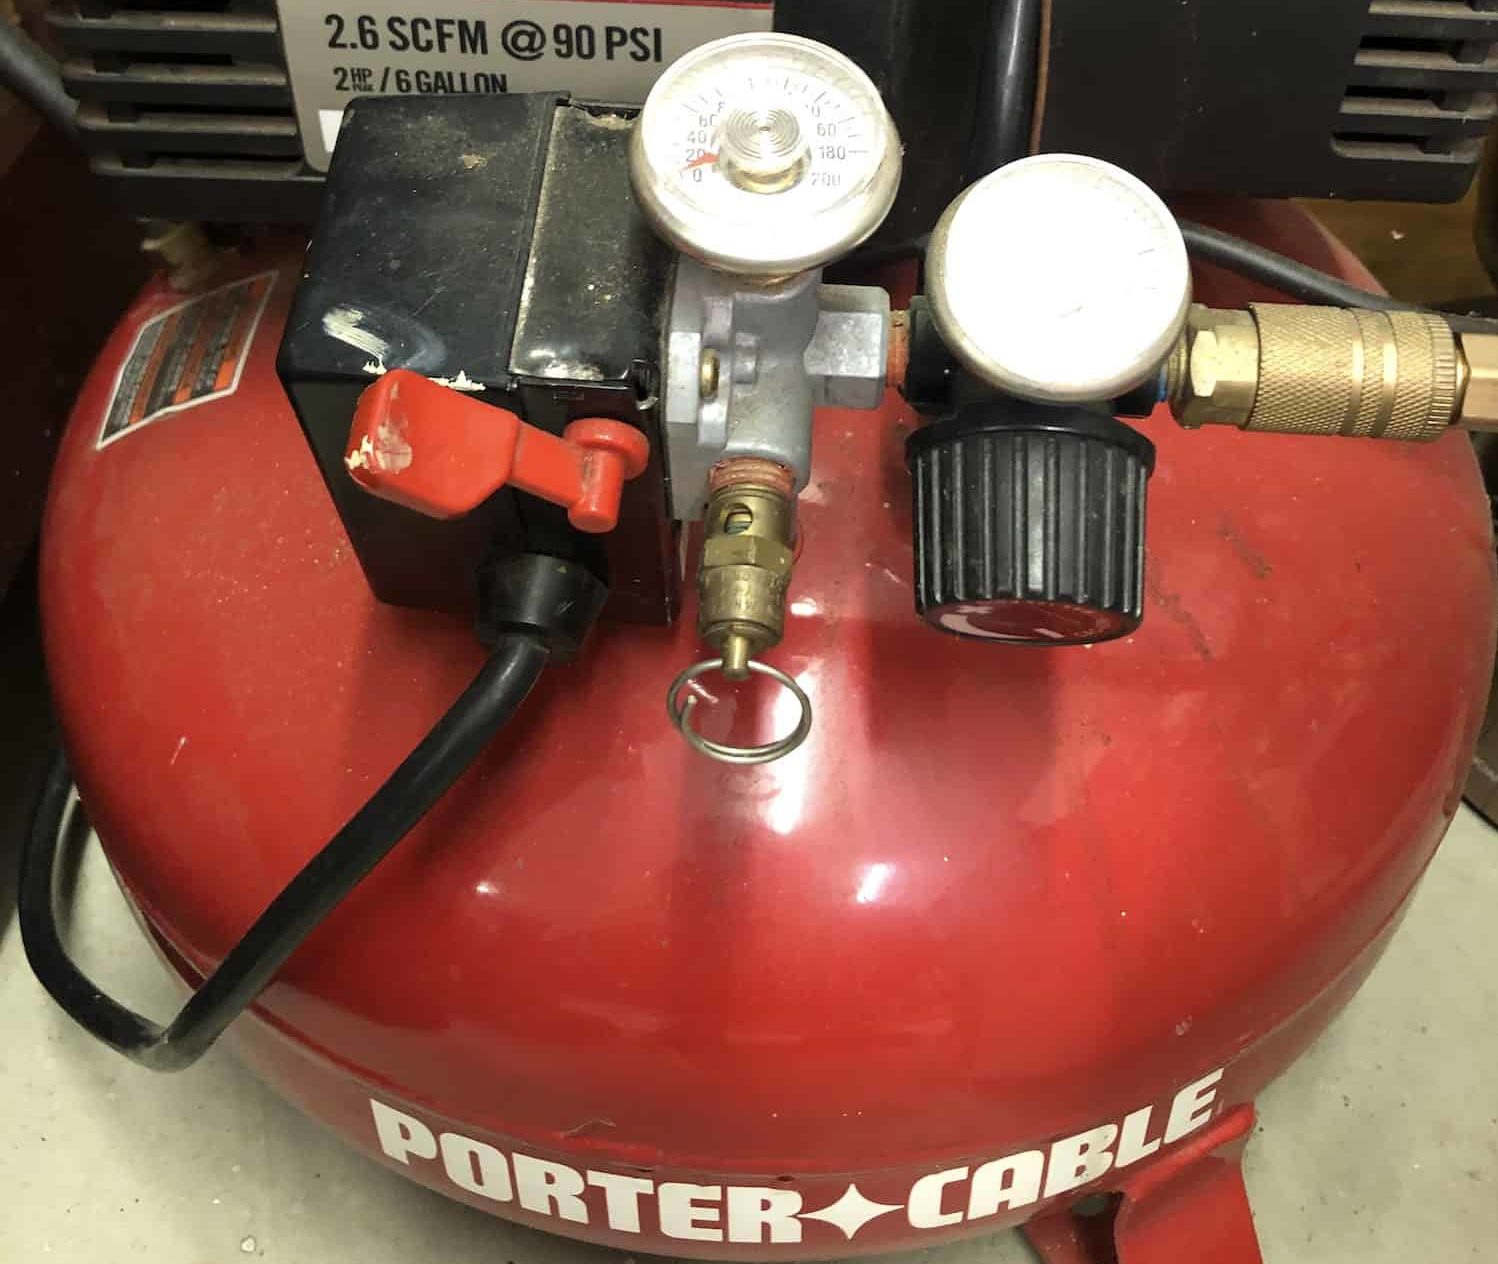 Best Air Compressor For Home Shop